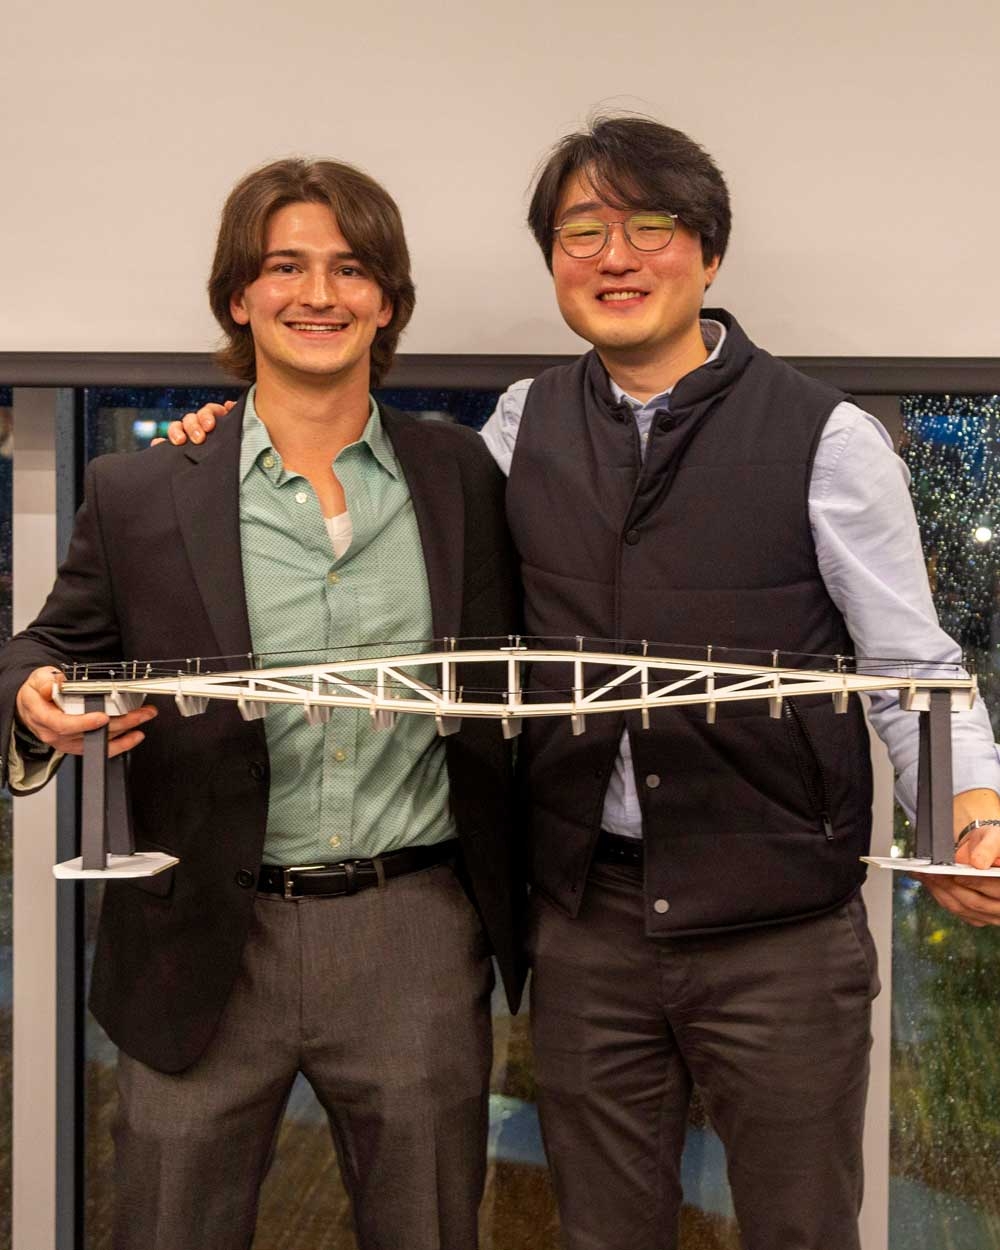 Isaac Wasson and Charles Kim pose holding the model of their winning bridge design